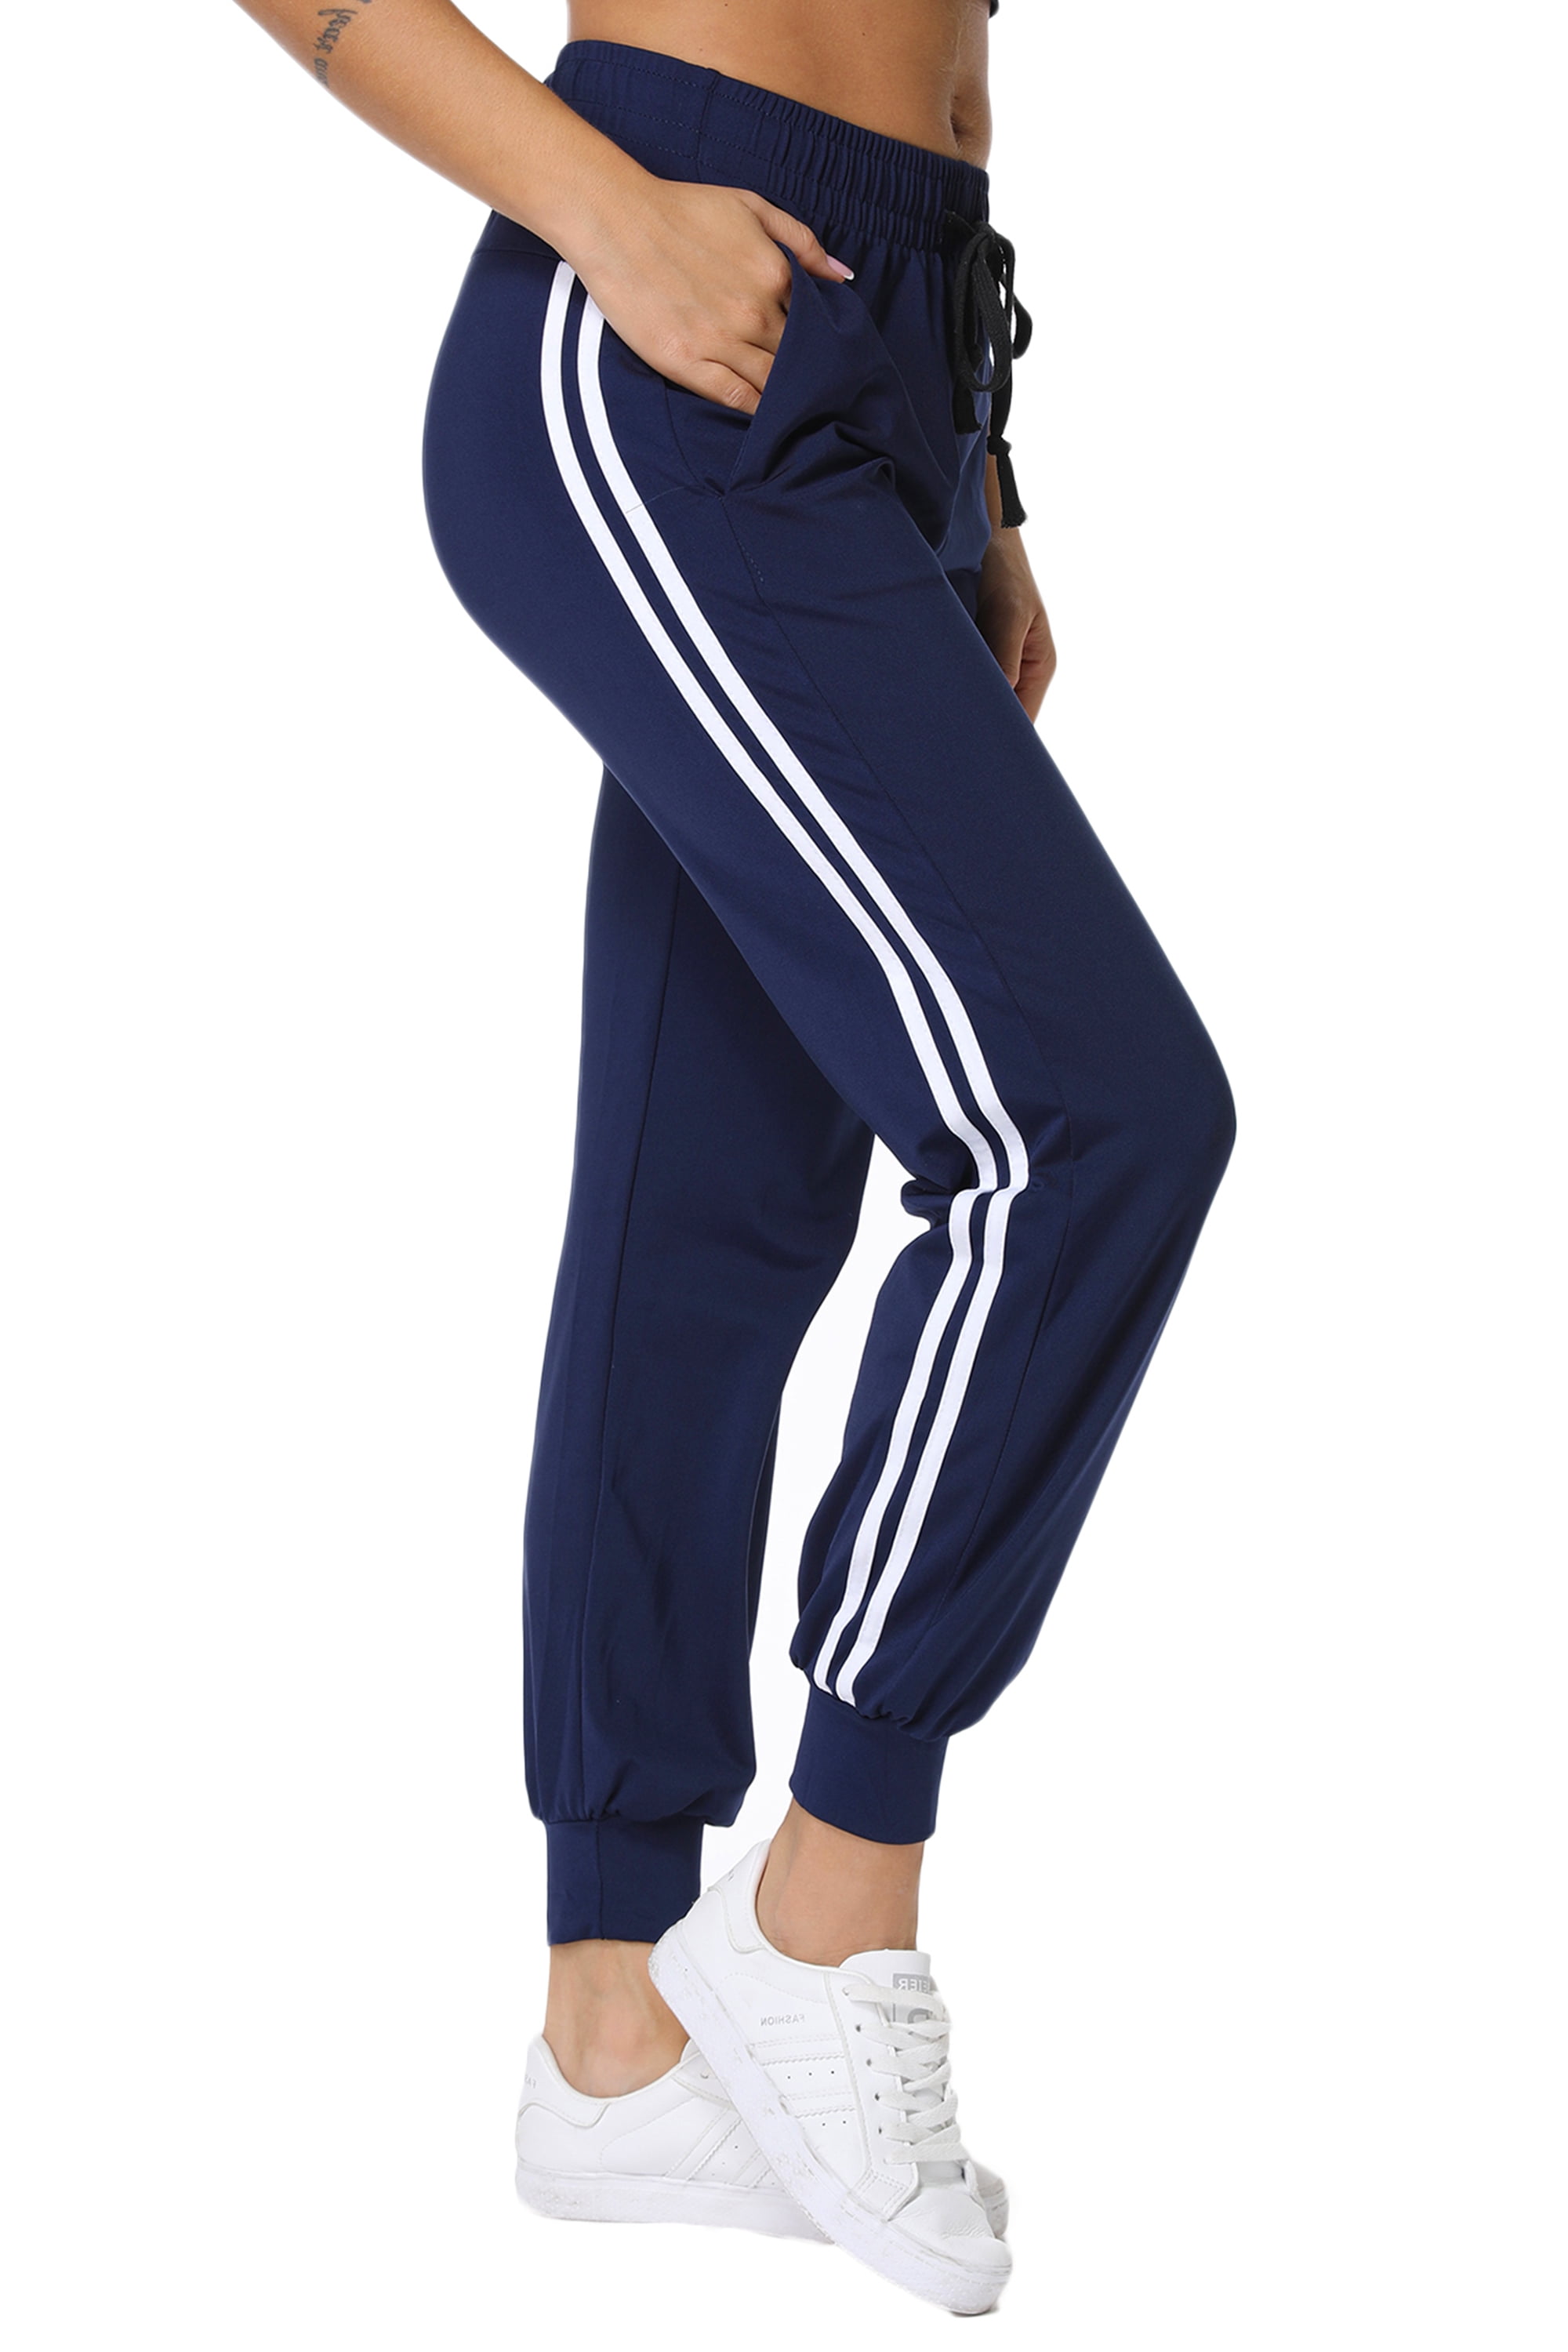 Black, 11-13 Years Teen Girls Sports Running Suit Tracksuit Stripe Off Shoulder Long Sleeve t-Shirt Tops Loose Casual Pants Trousers Sportswear Outfit